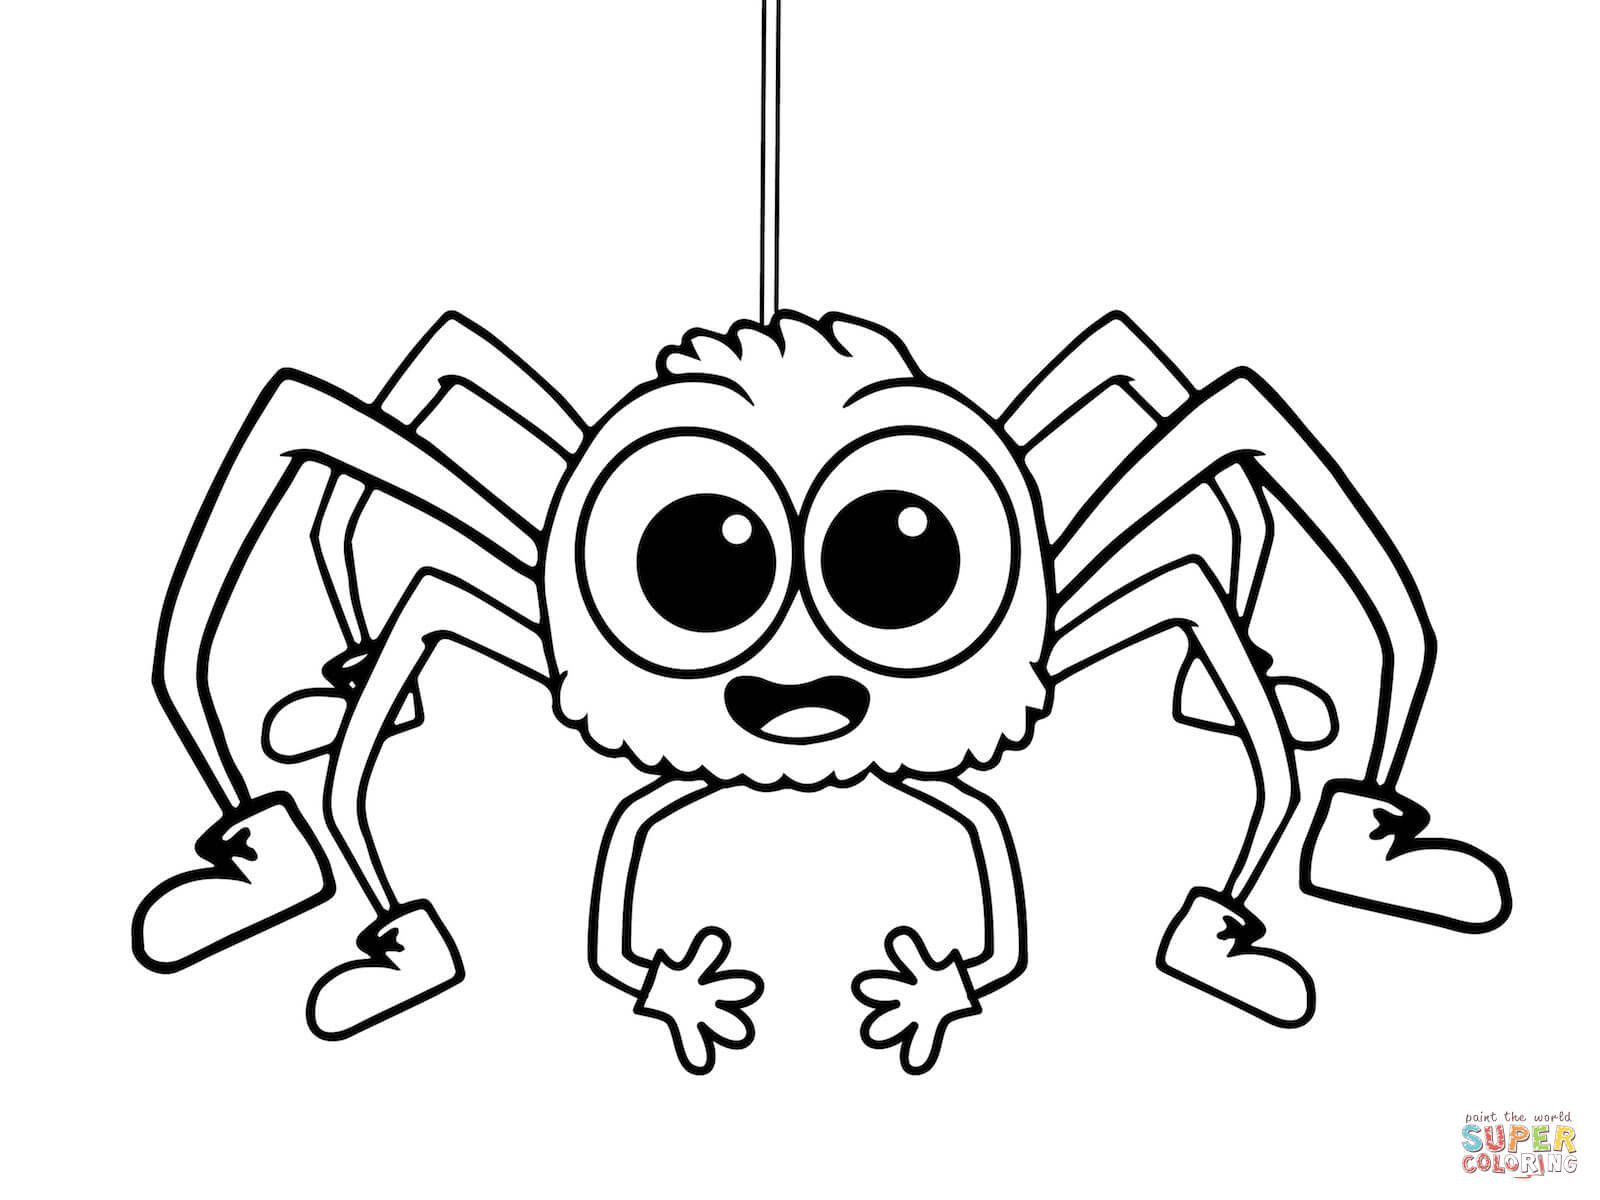 Itsy Bitsy Spider coloring pages | Free Coloring Pages